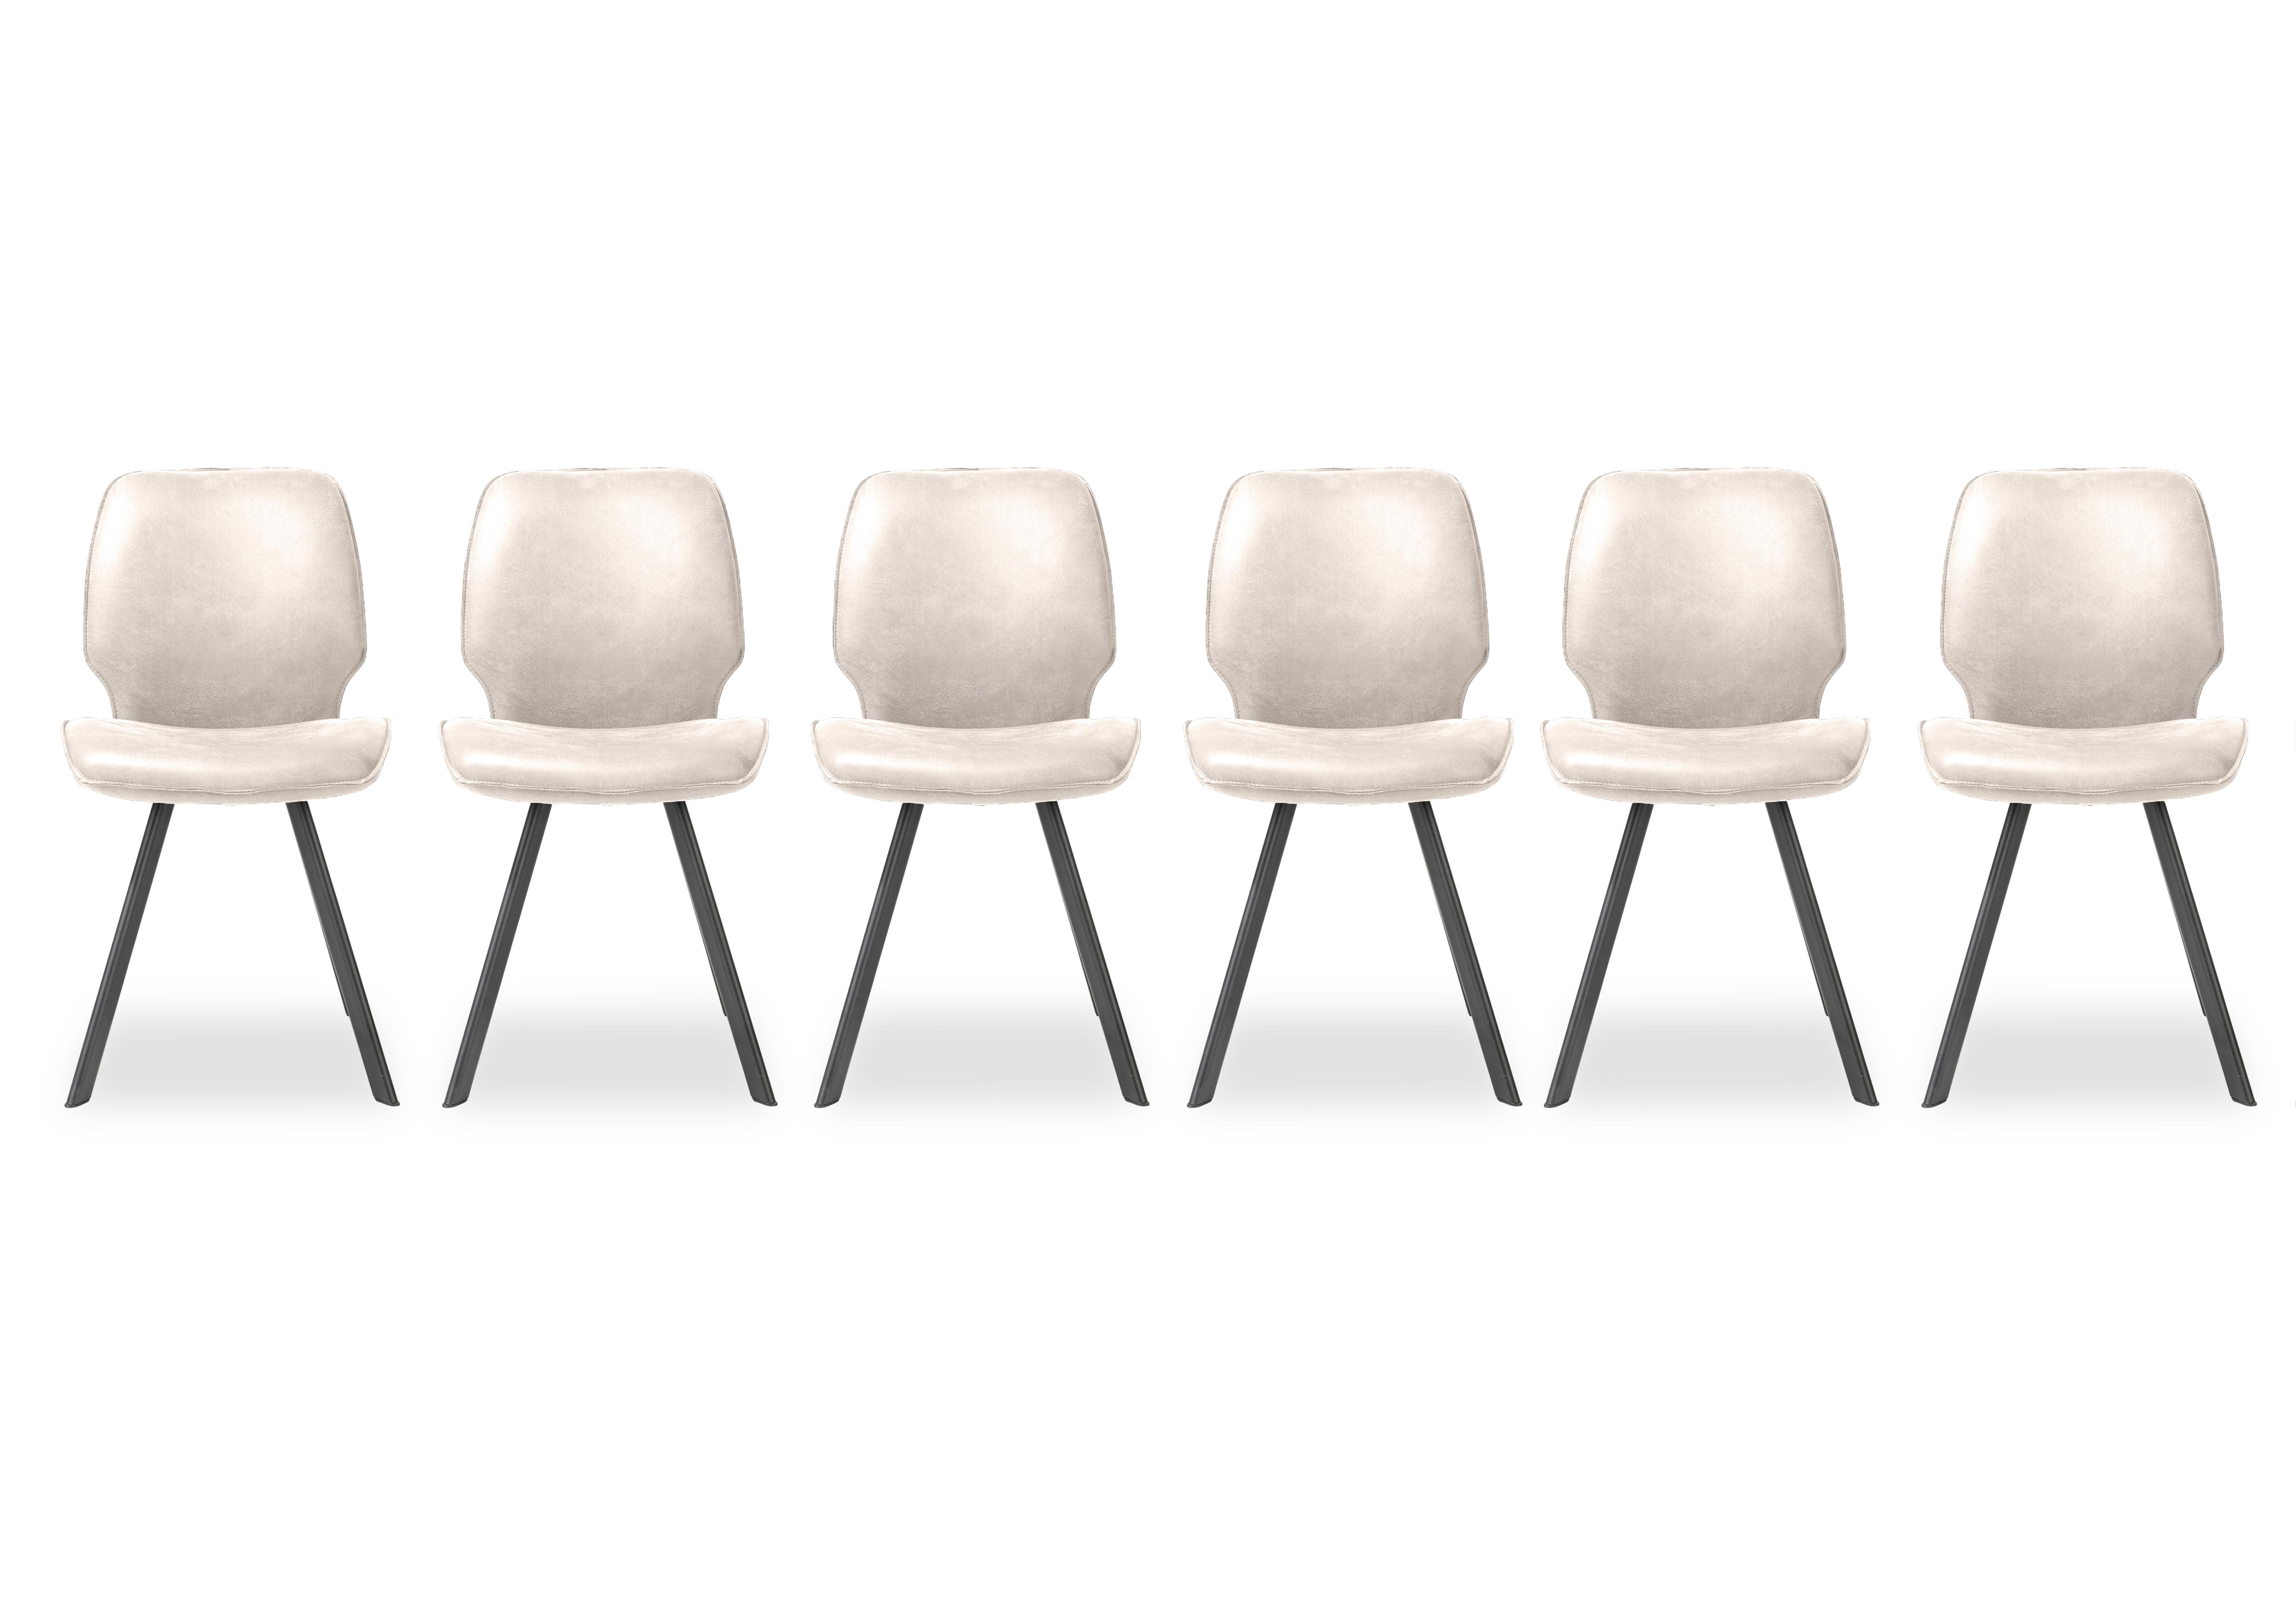 Montreal Semmi Set of 6 Dining Chairs in Kiezel on Furniture Village